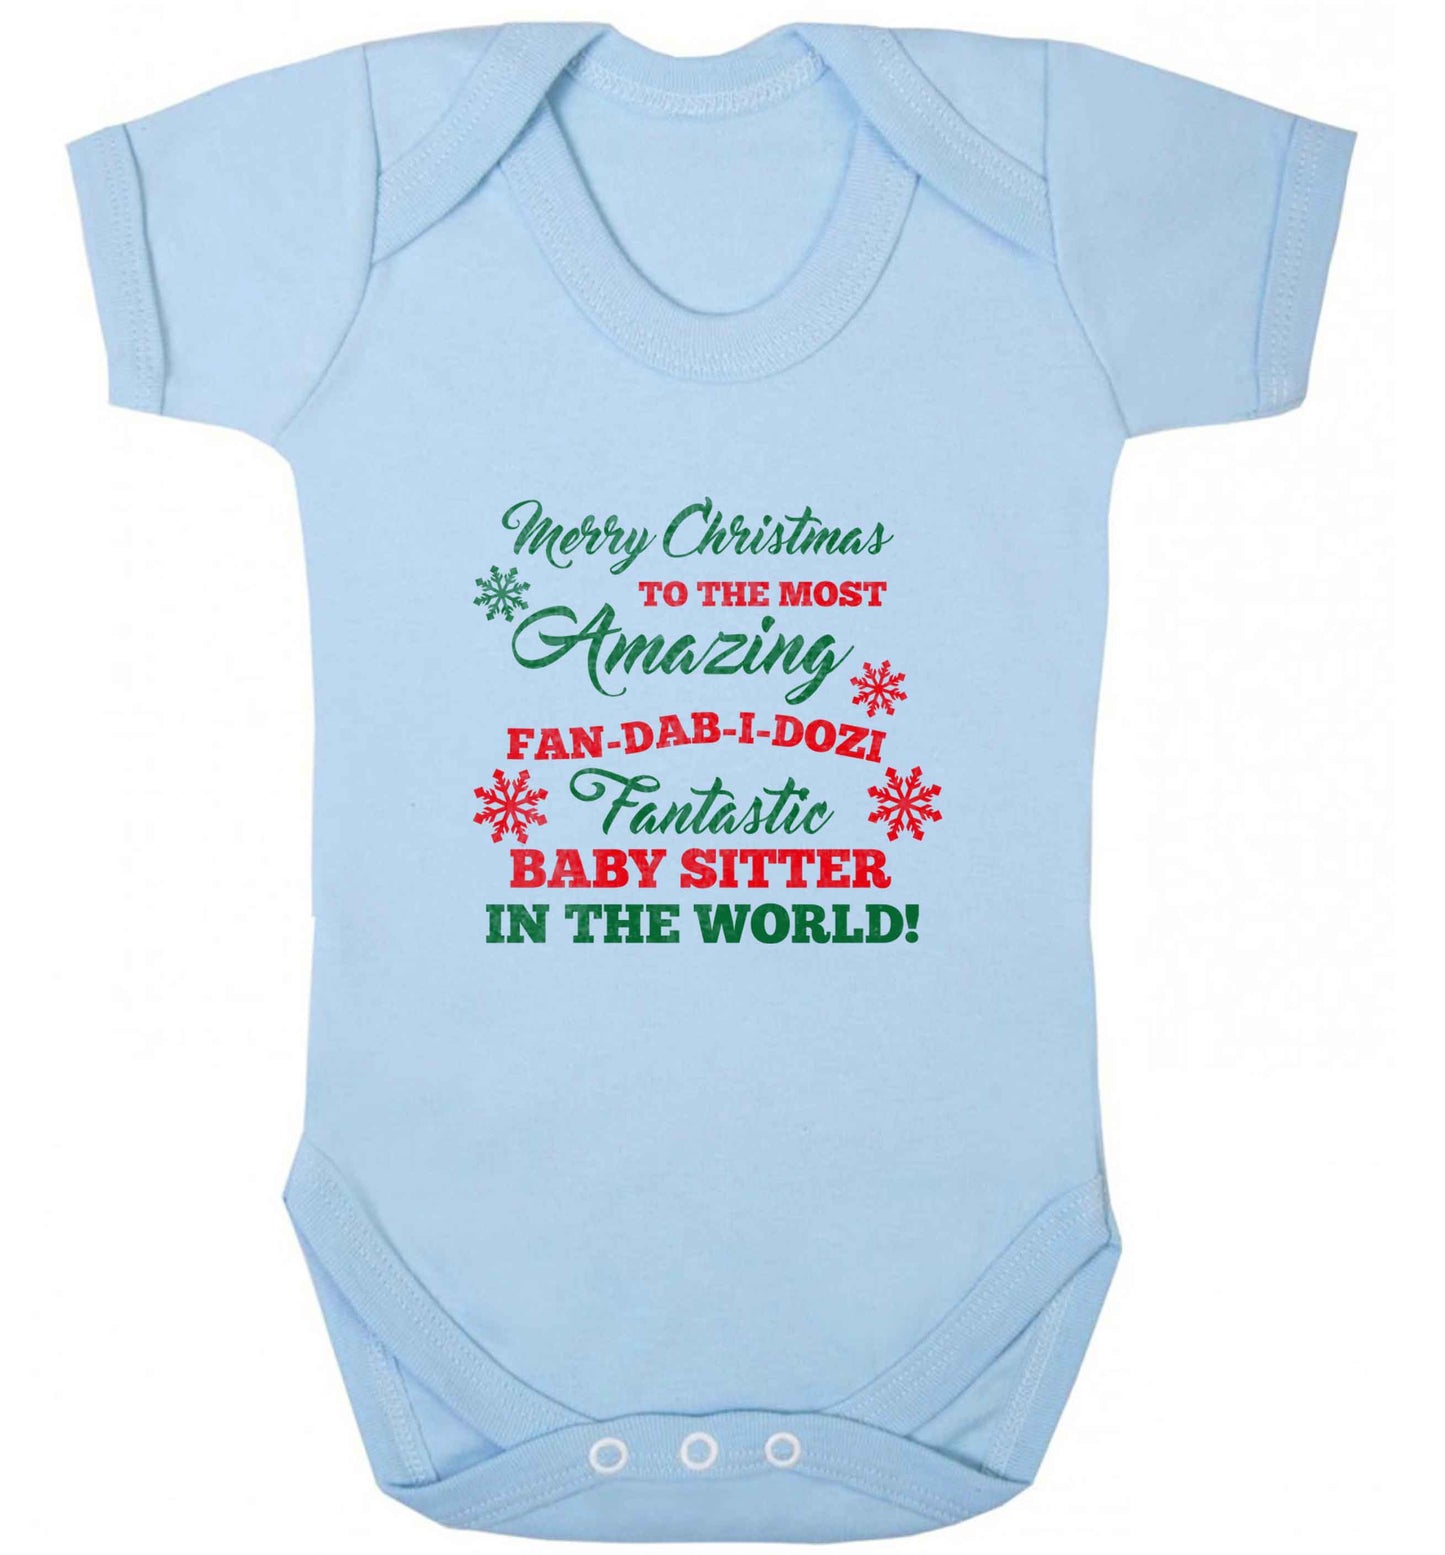 Merry Christmas to the most amazing fan-dab-i-dozi fantasic baby sitter in the world baby vest pale blue 18-24 months